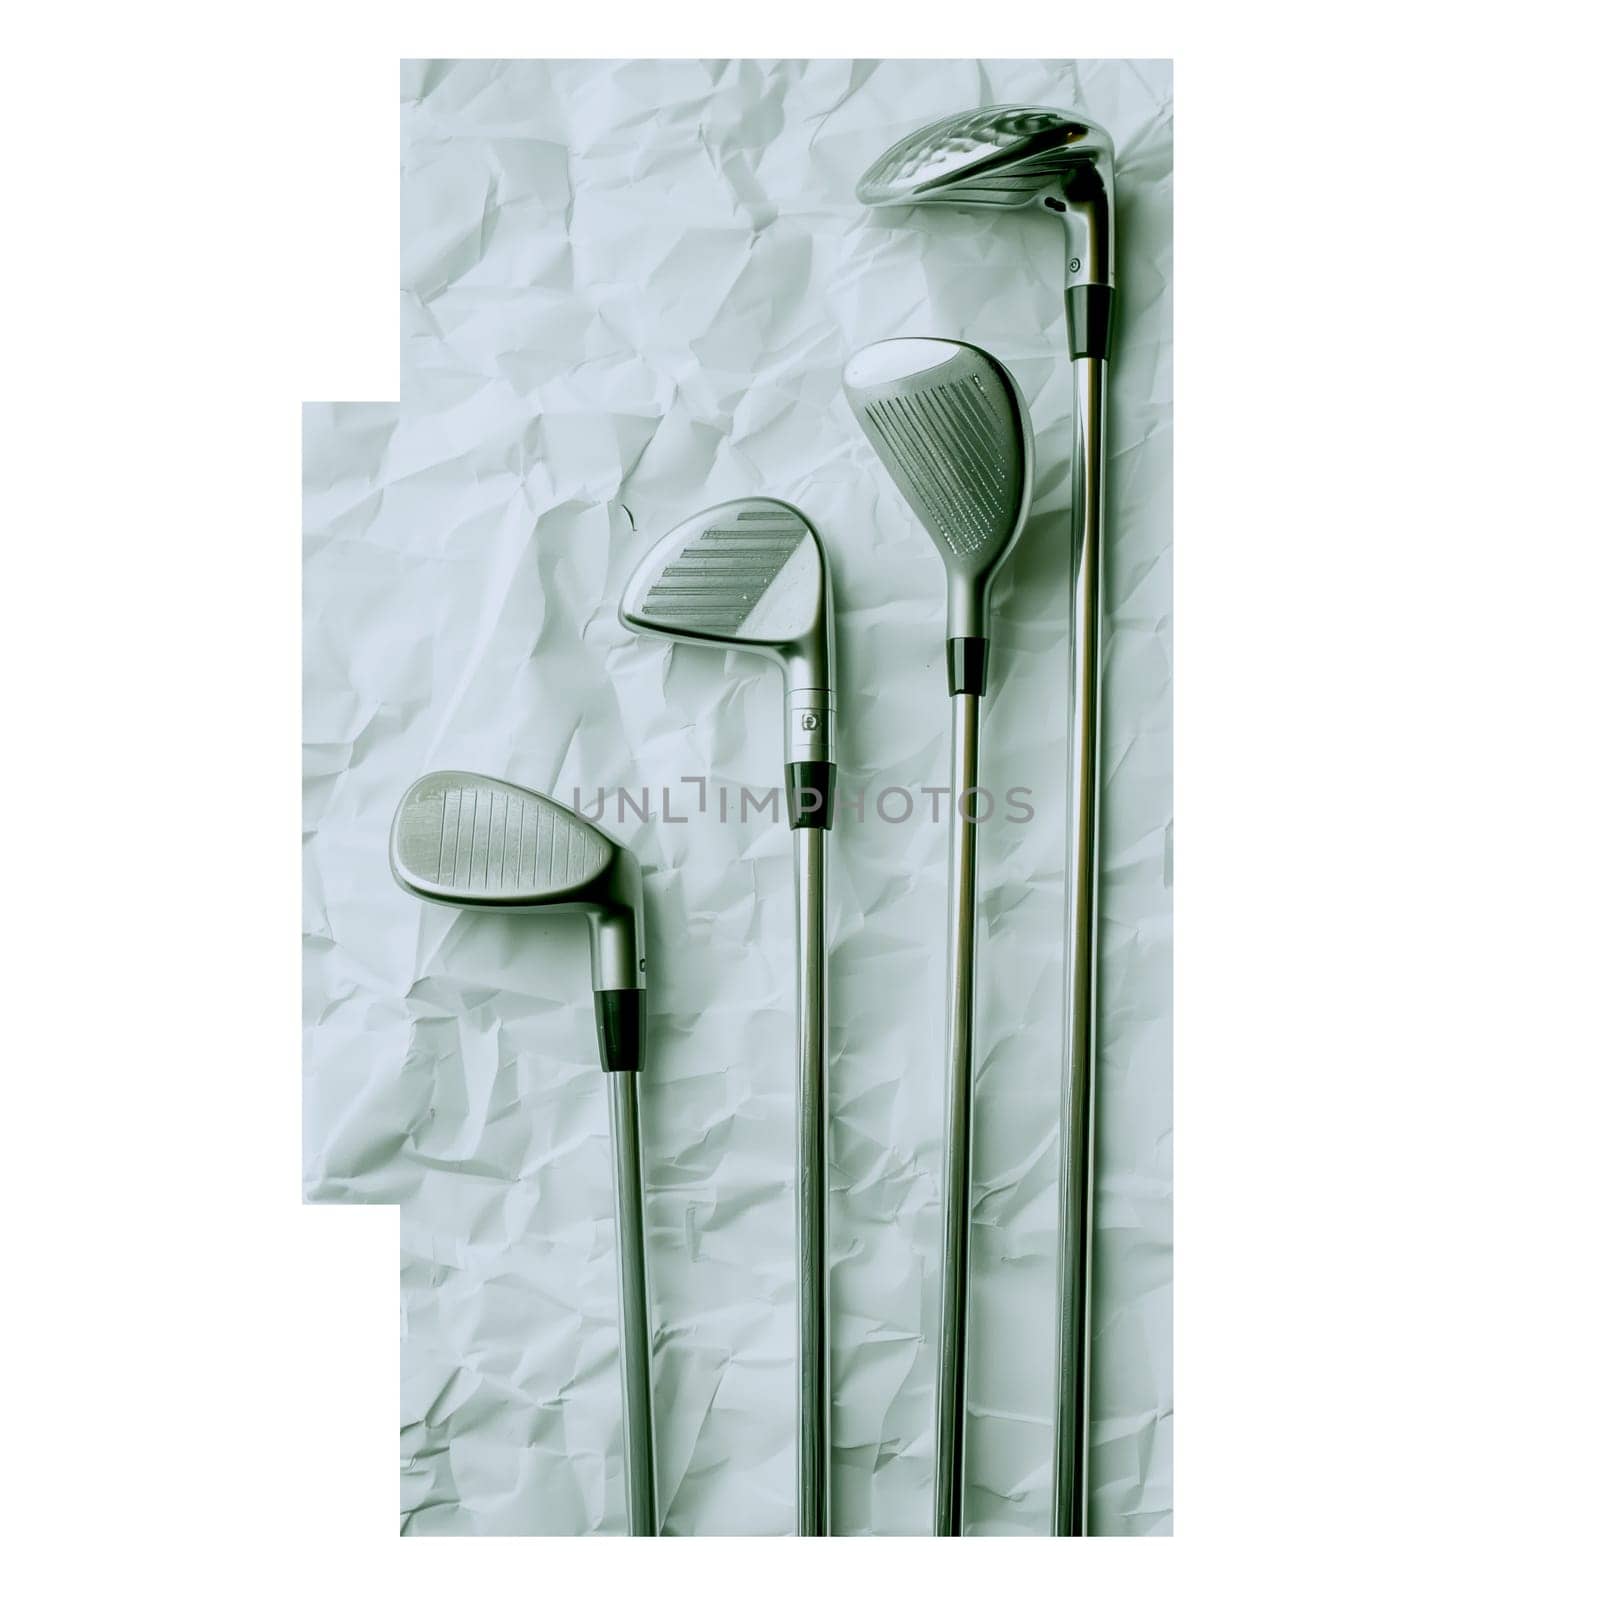 Golf equipment on crumpled paper cut out image by Dustick